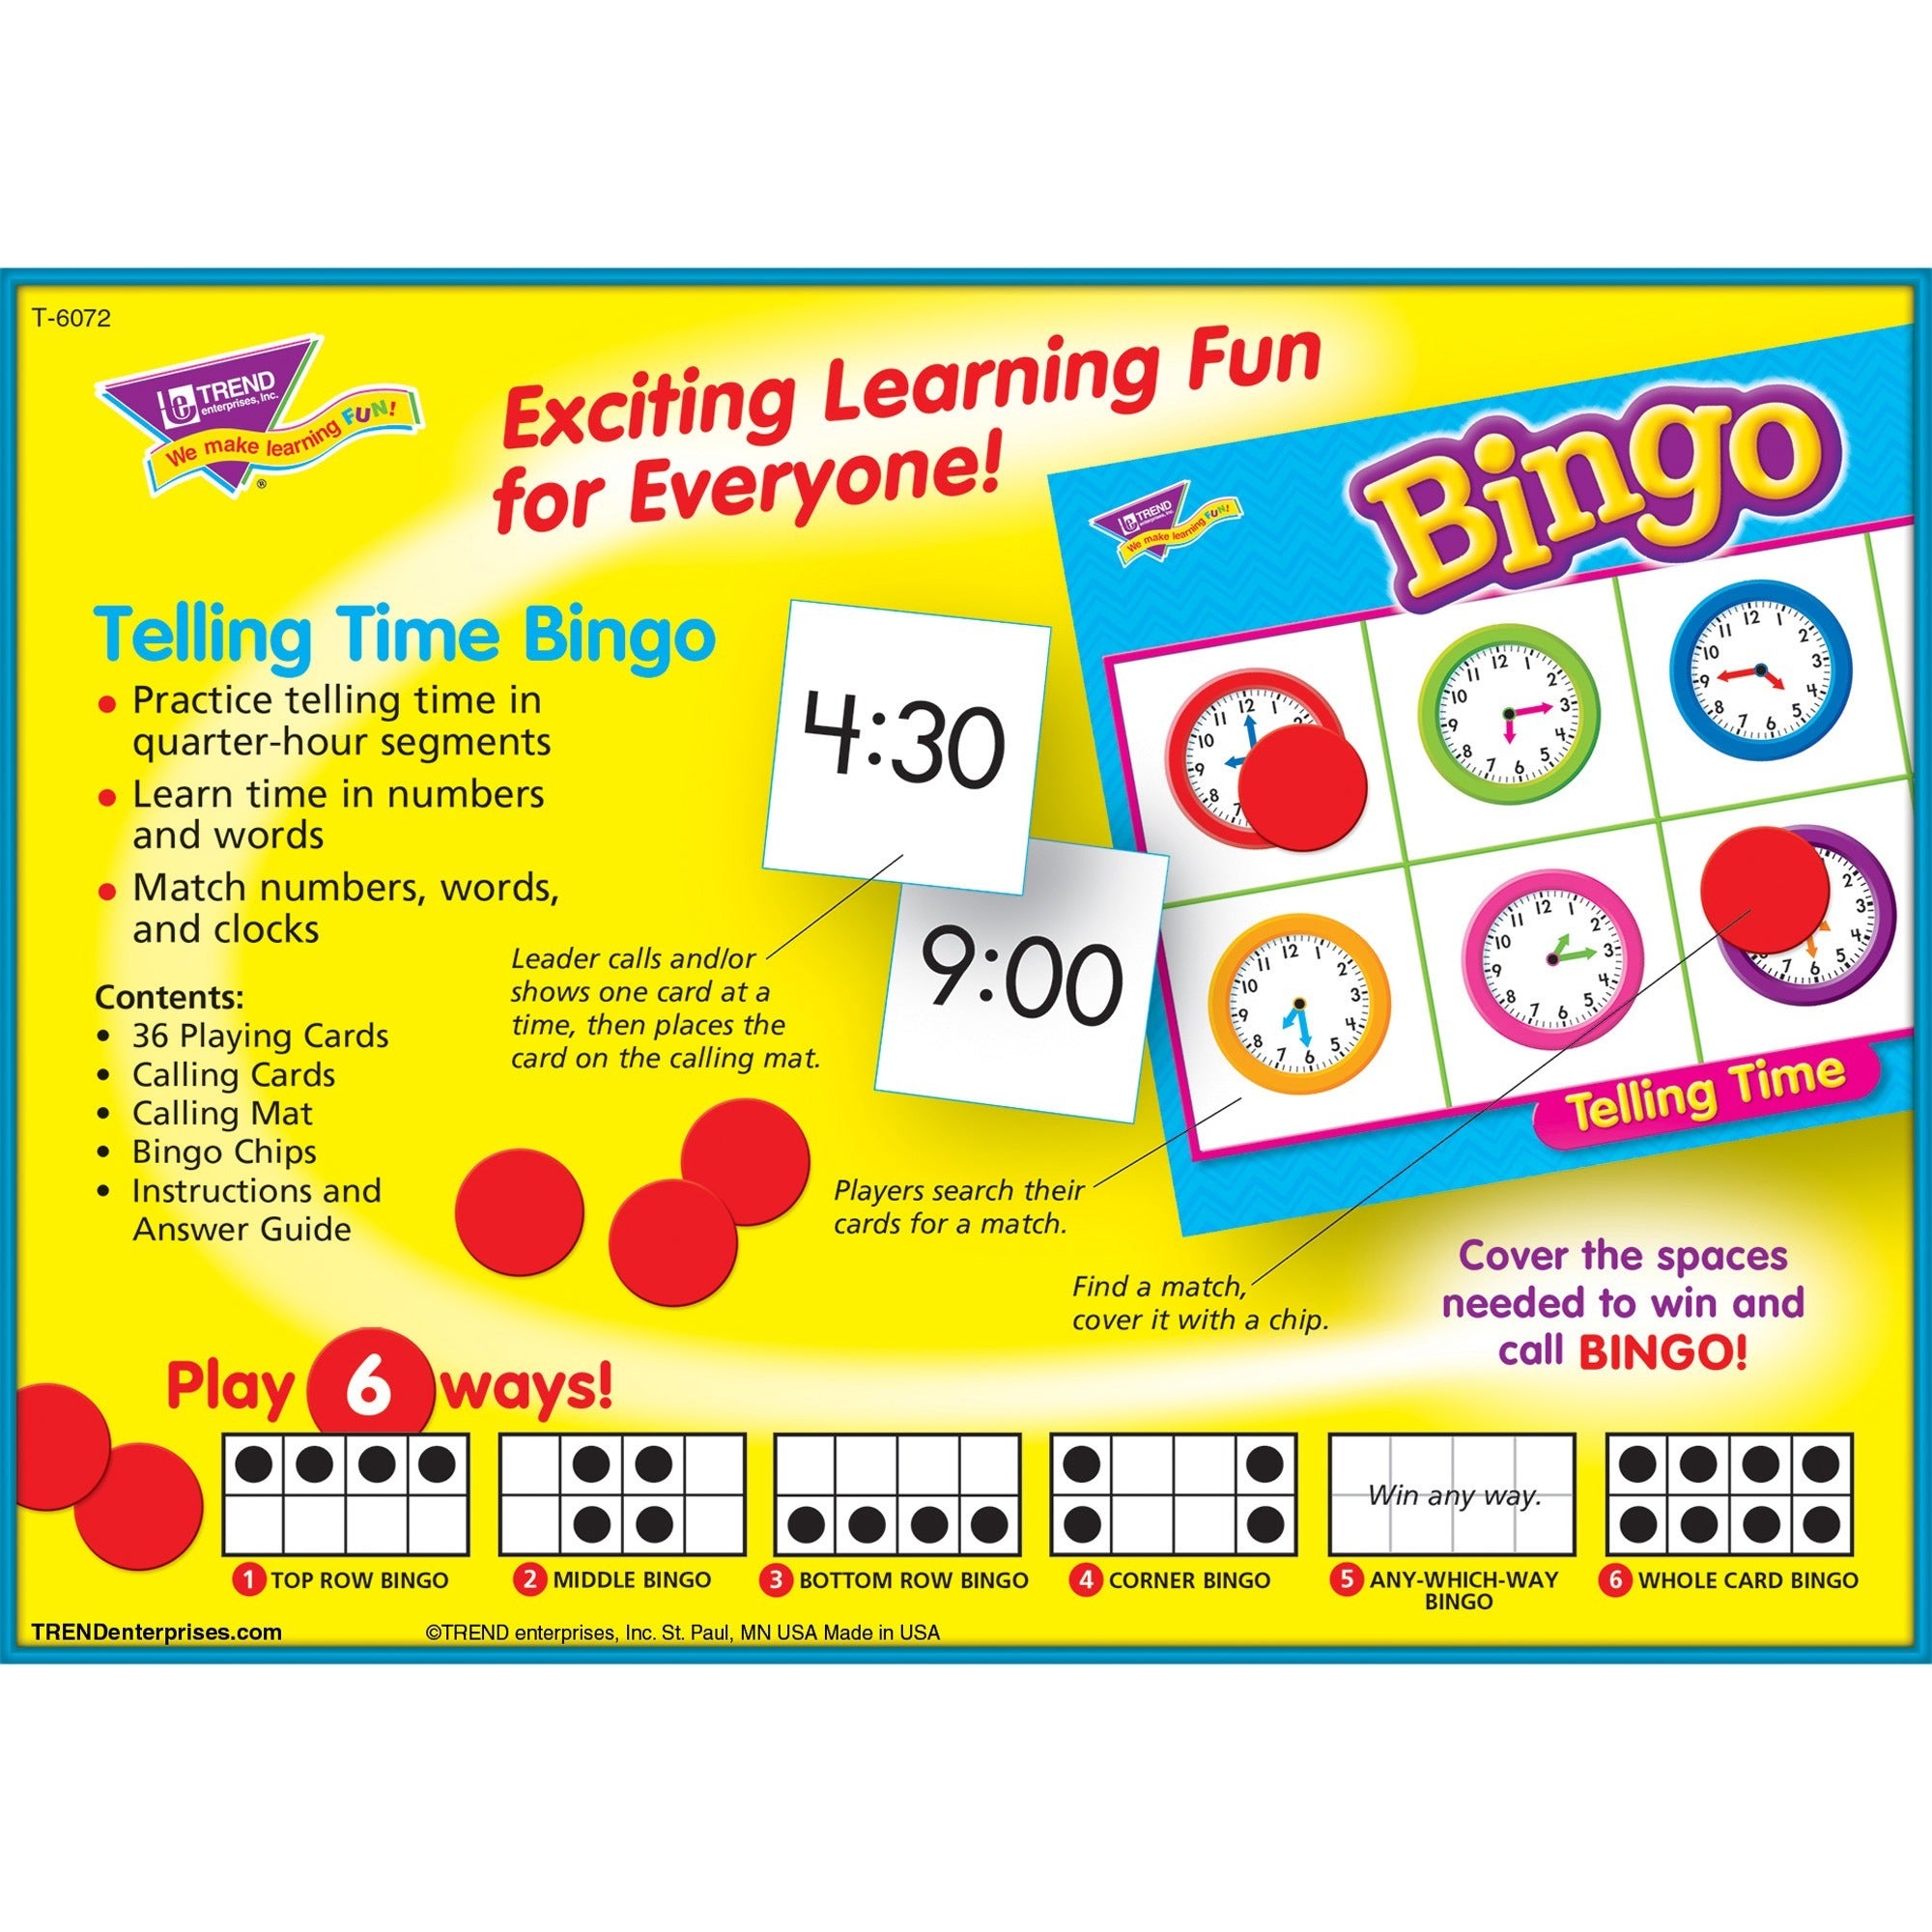 Trend Telling Time Bingo Game - Theme/Subject: Learning - Skill Learning: Time, Language - 6-8 Year - 